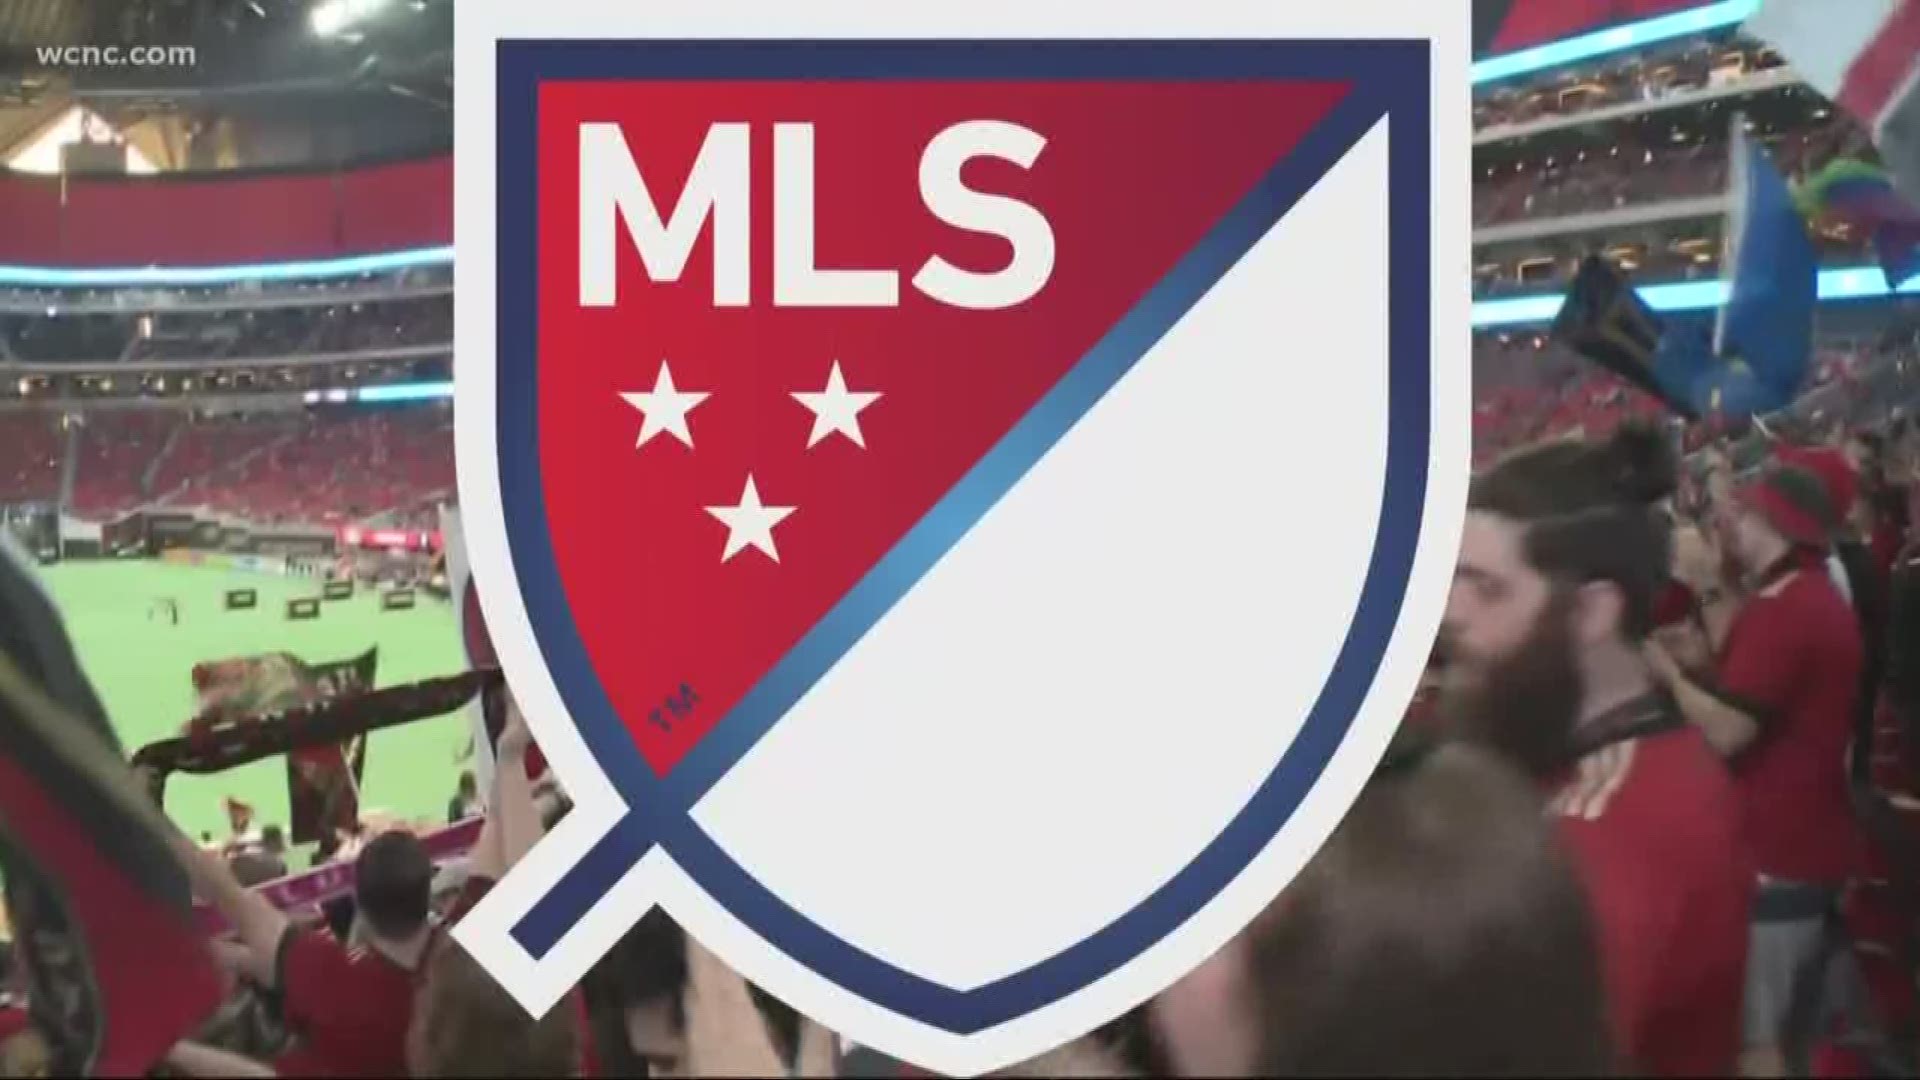 A letter by Charlotte Mayor Vi Lyles to Major League Soccer outlines the city's commitment to host a MLS team.